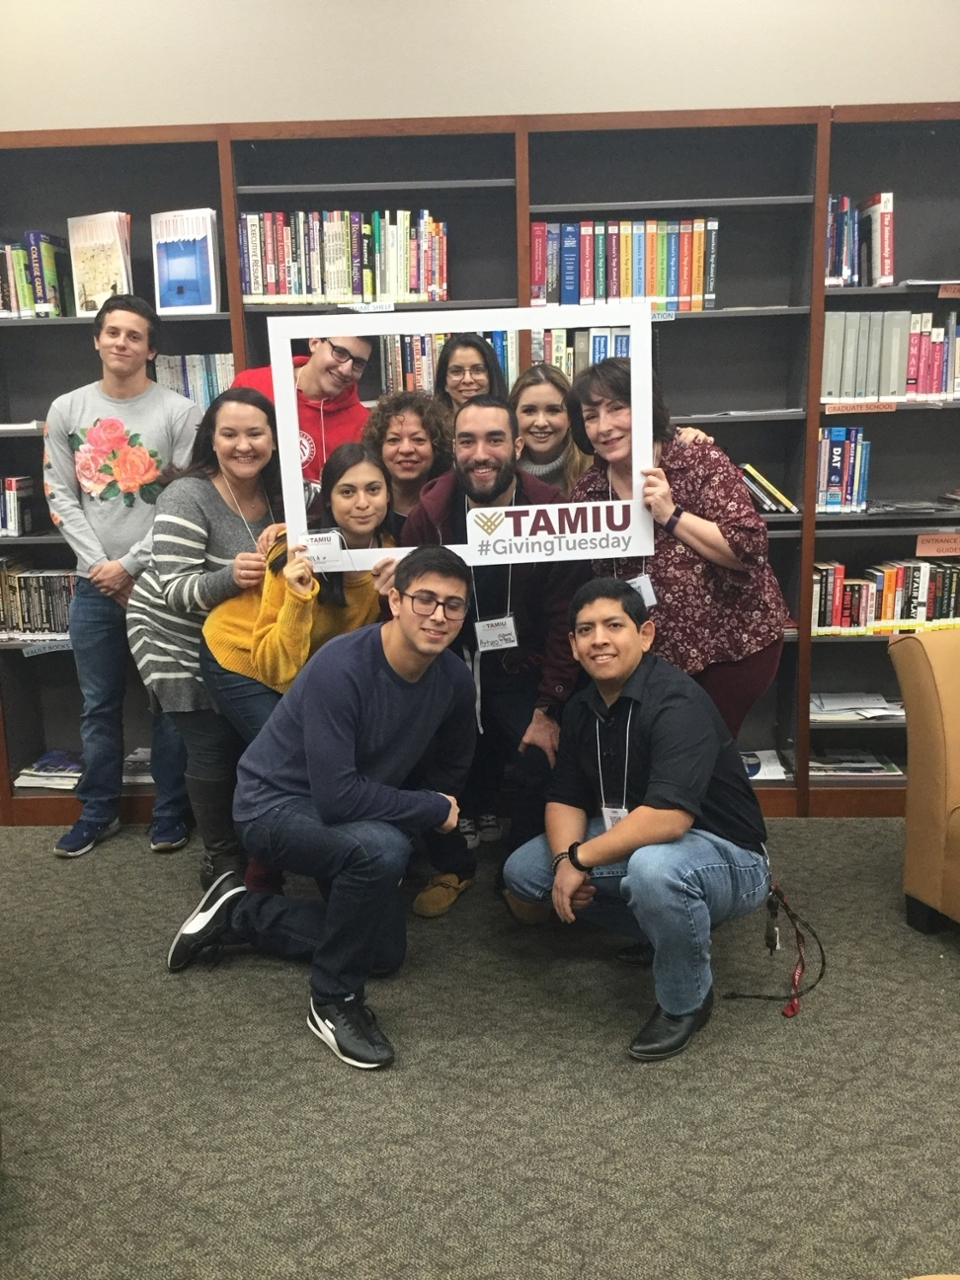 TAMIU employees and students celebrating giving Tuesday